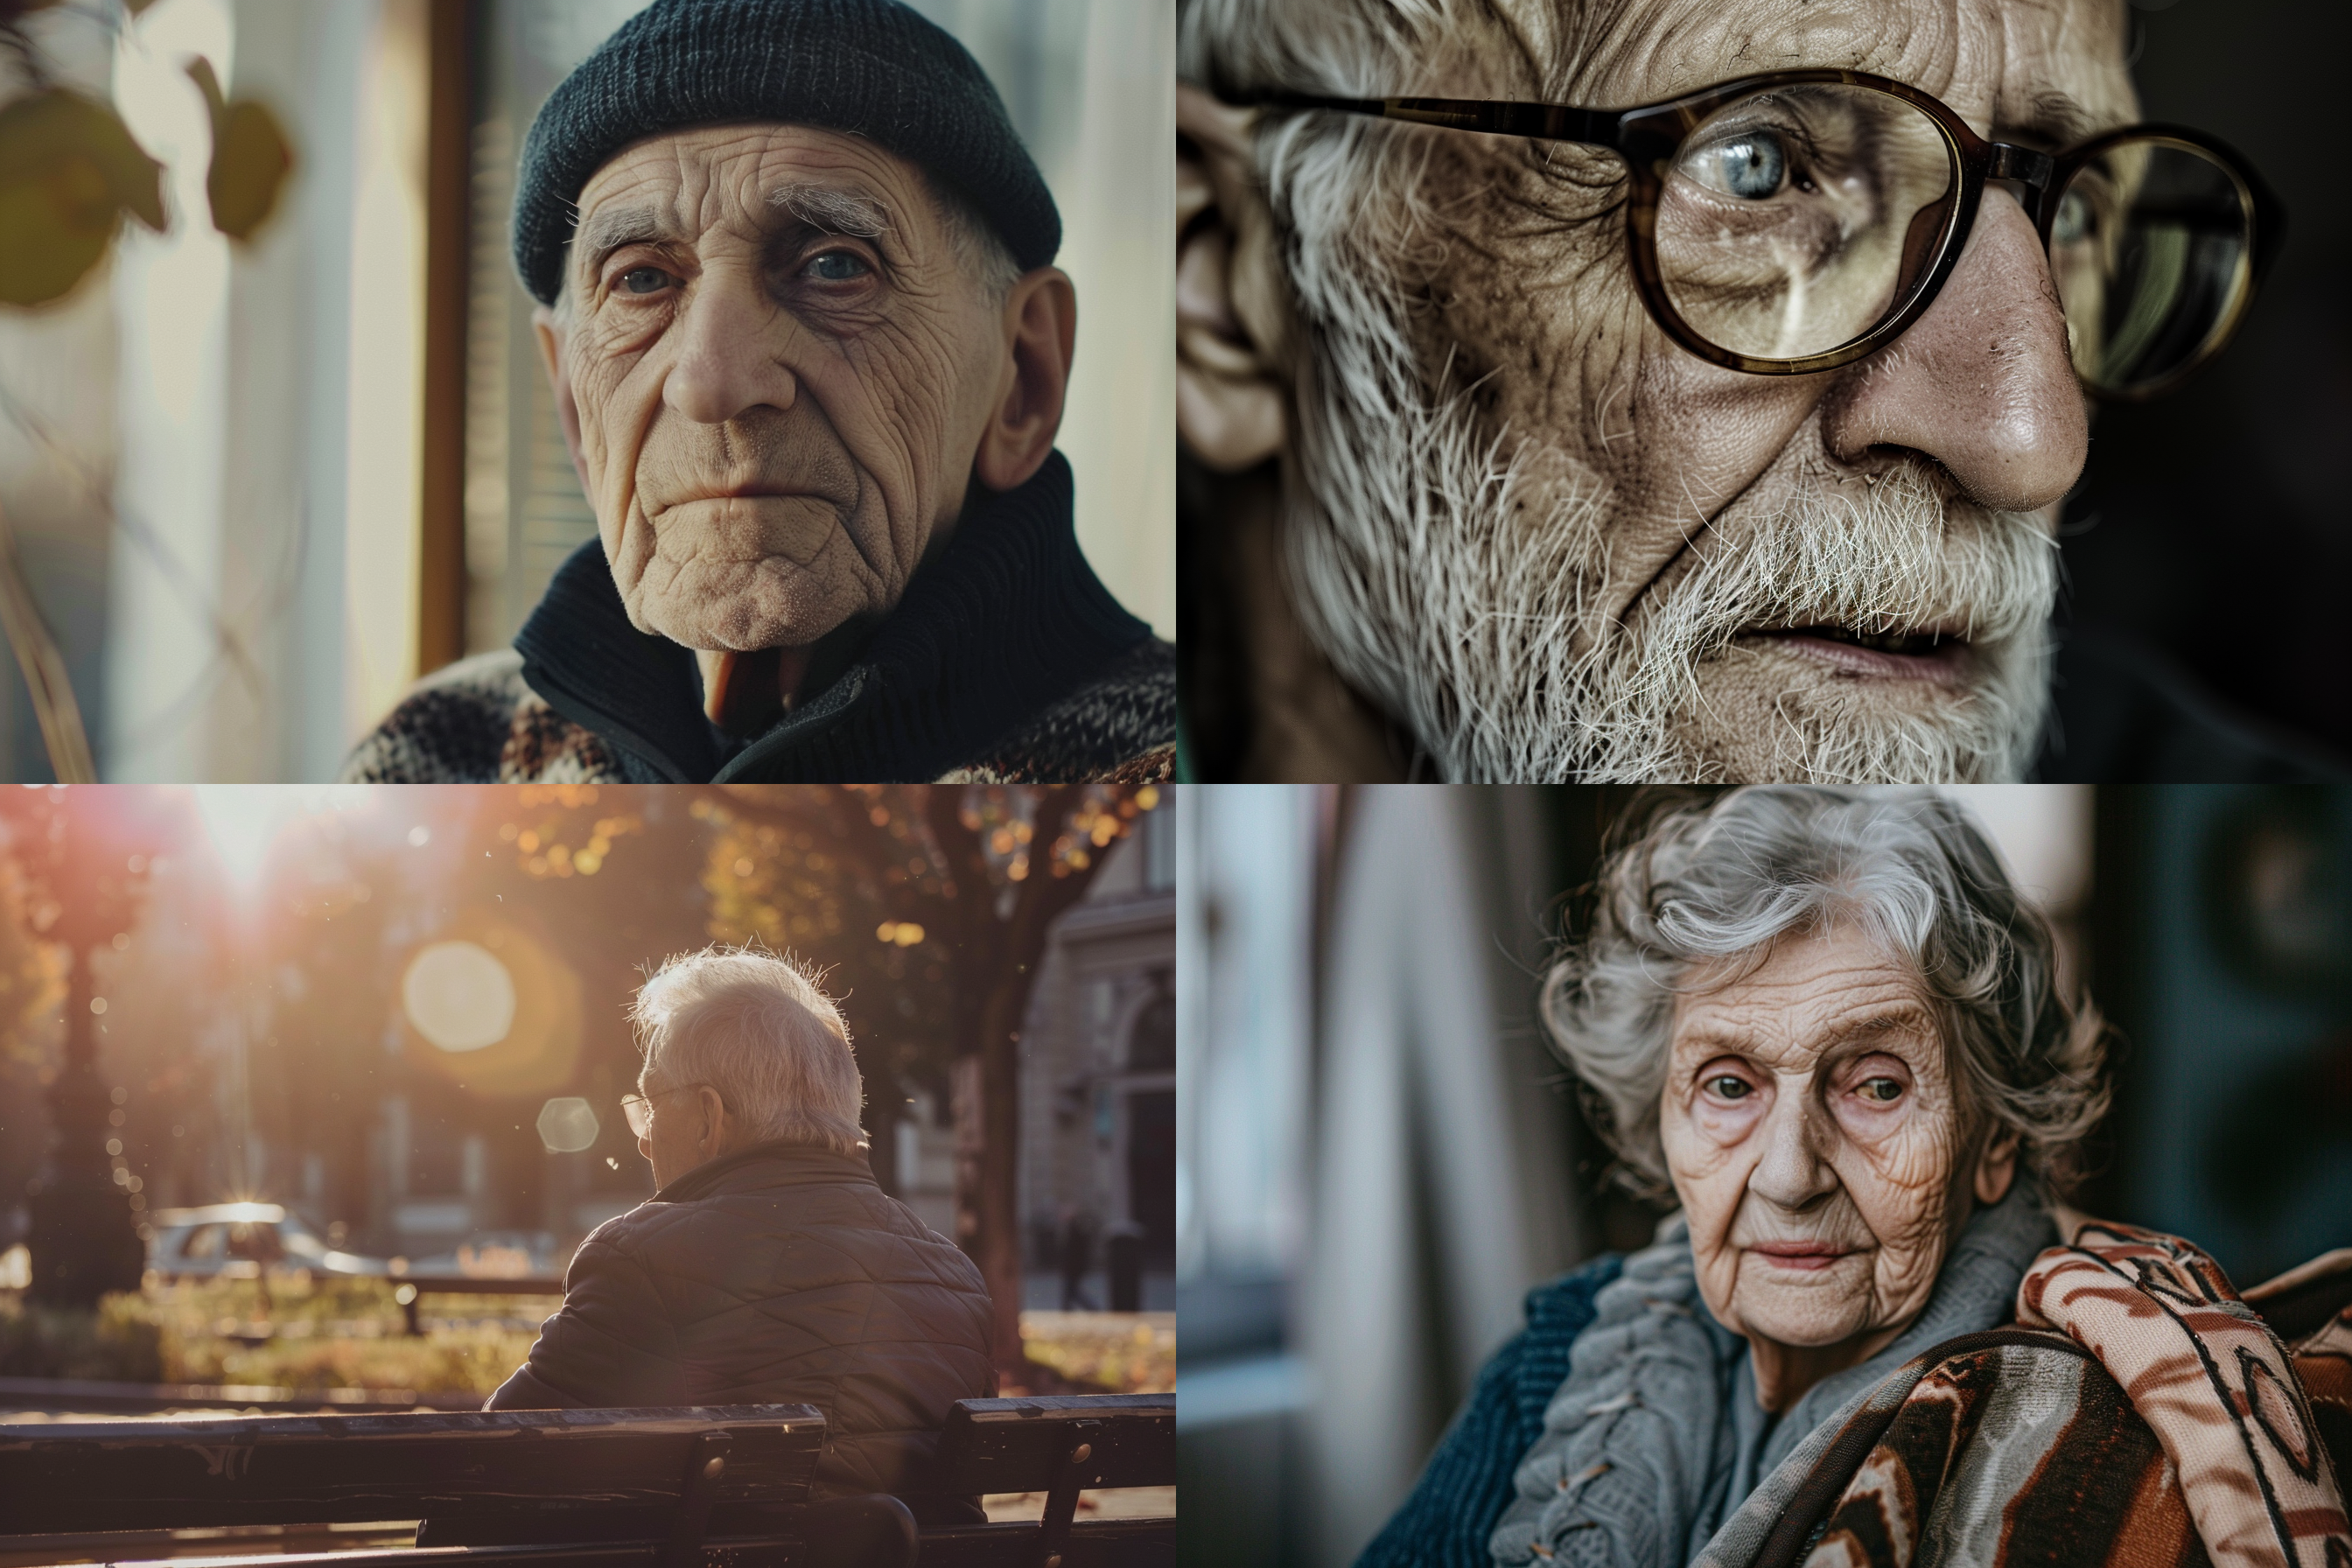 A collage of images of four elderly people | Source: Midjourney